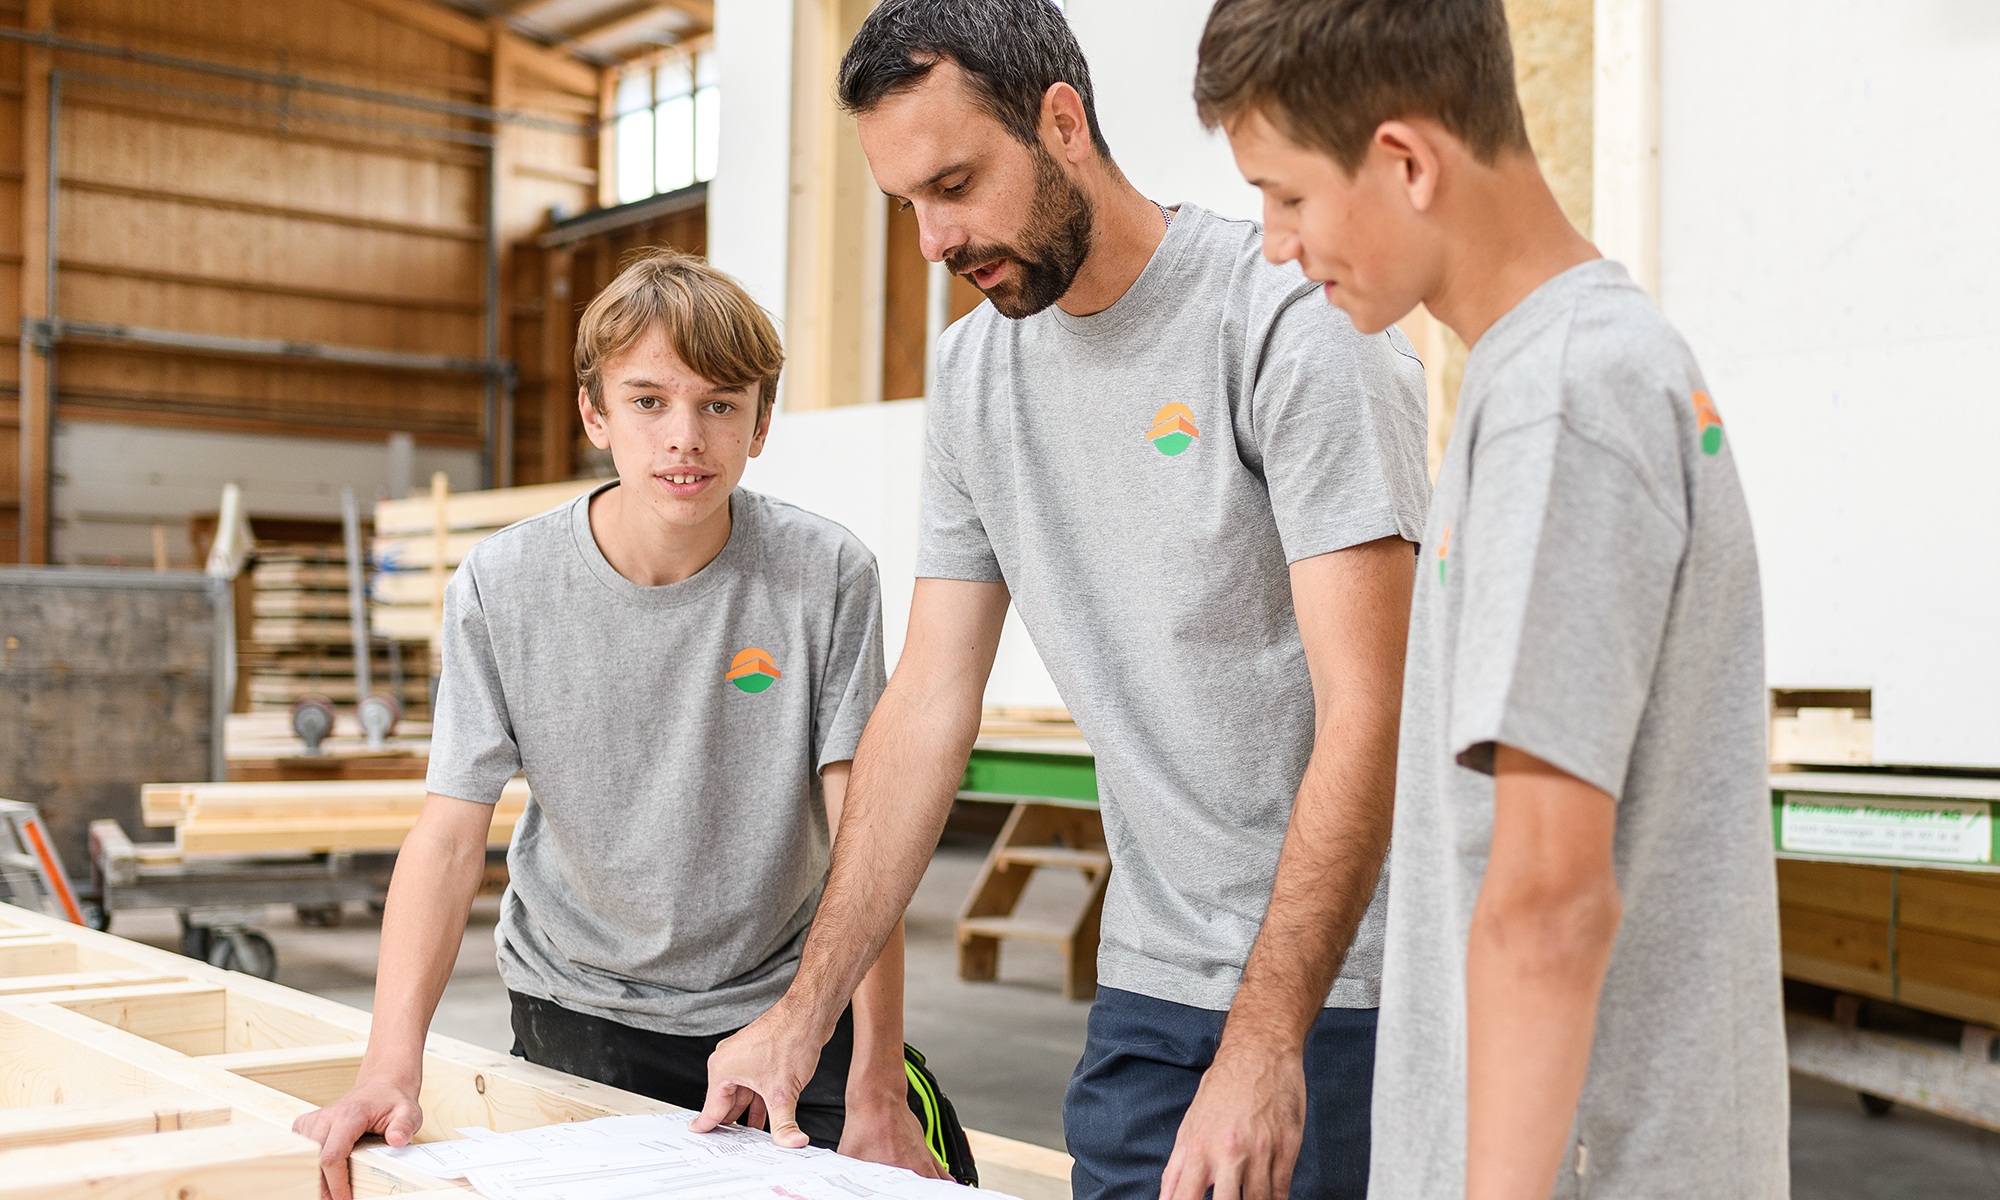 A group of 2 apprentices and an instructor, mid-discussion. One person is looking at the camera, 2 are looking at a diagram.